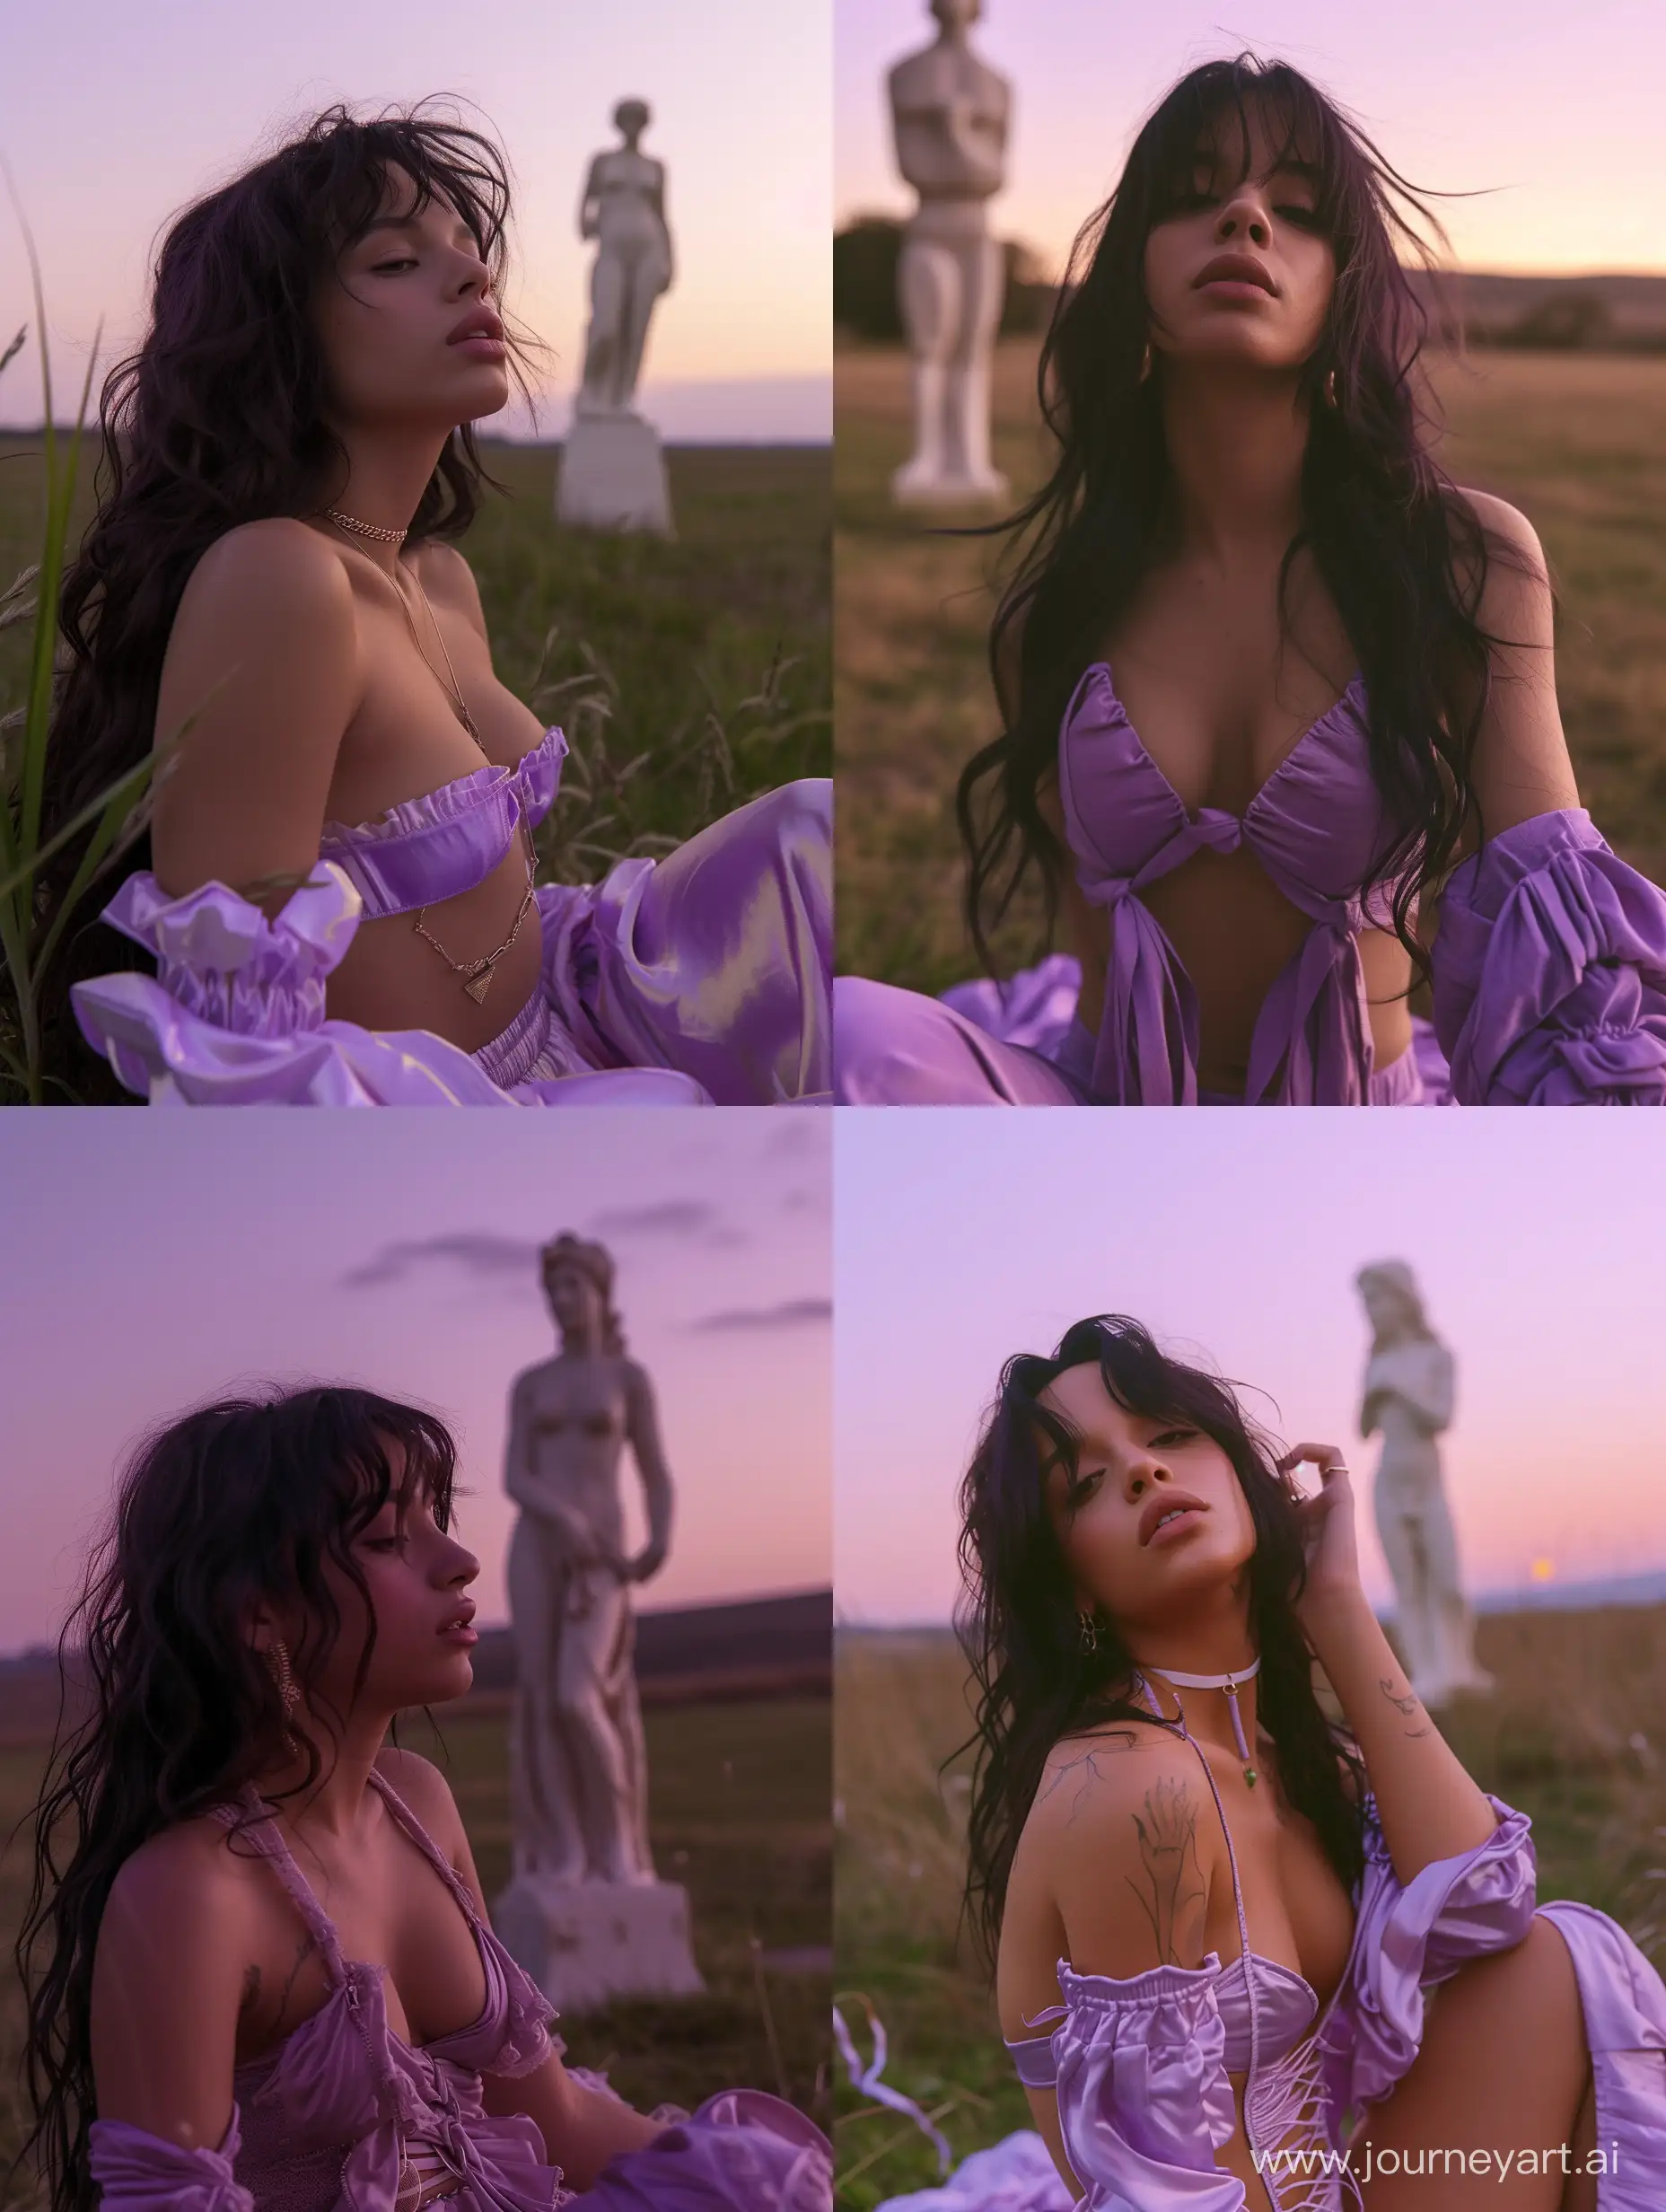 Captivating-Purple-Sunrise-Realistic-Camila-DarkHair-Cabello-Admiring-Herself-in-FigureWrapping-Street-Outfit